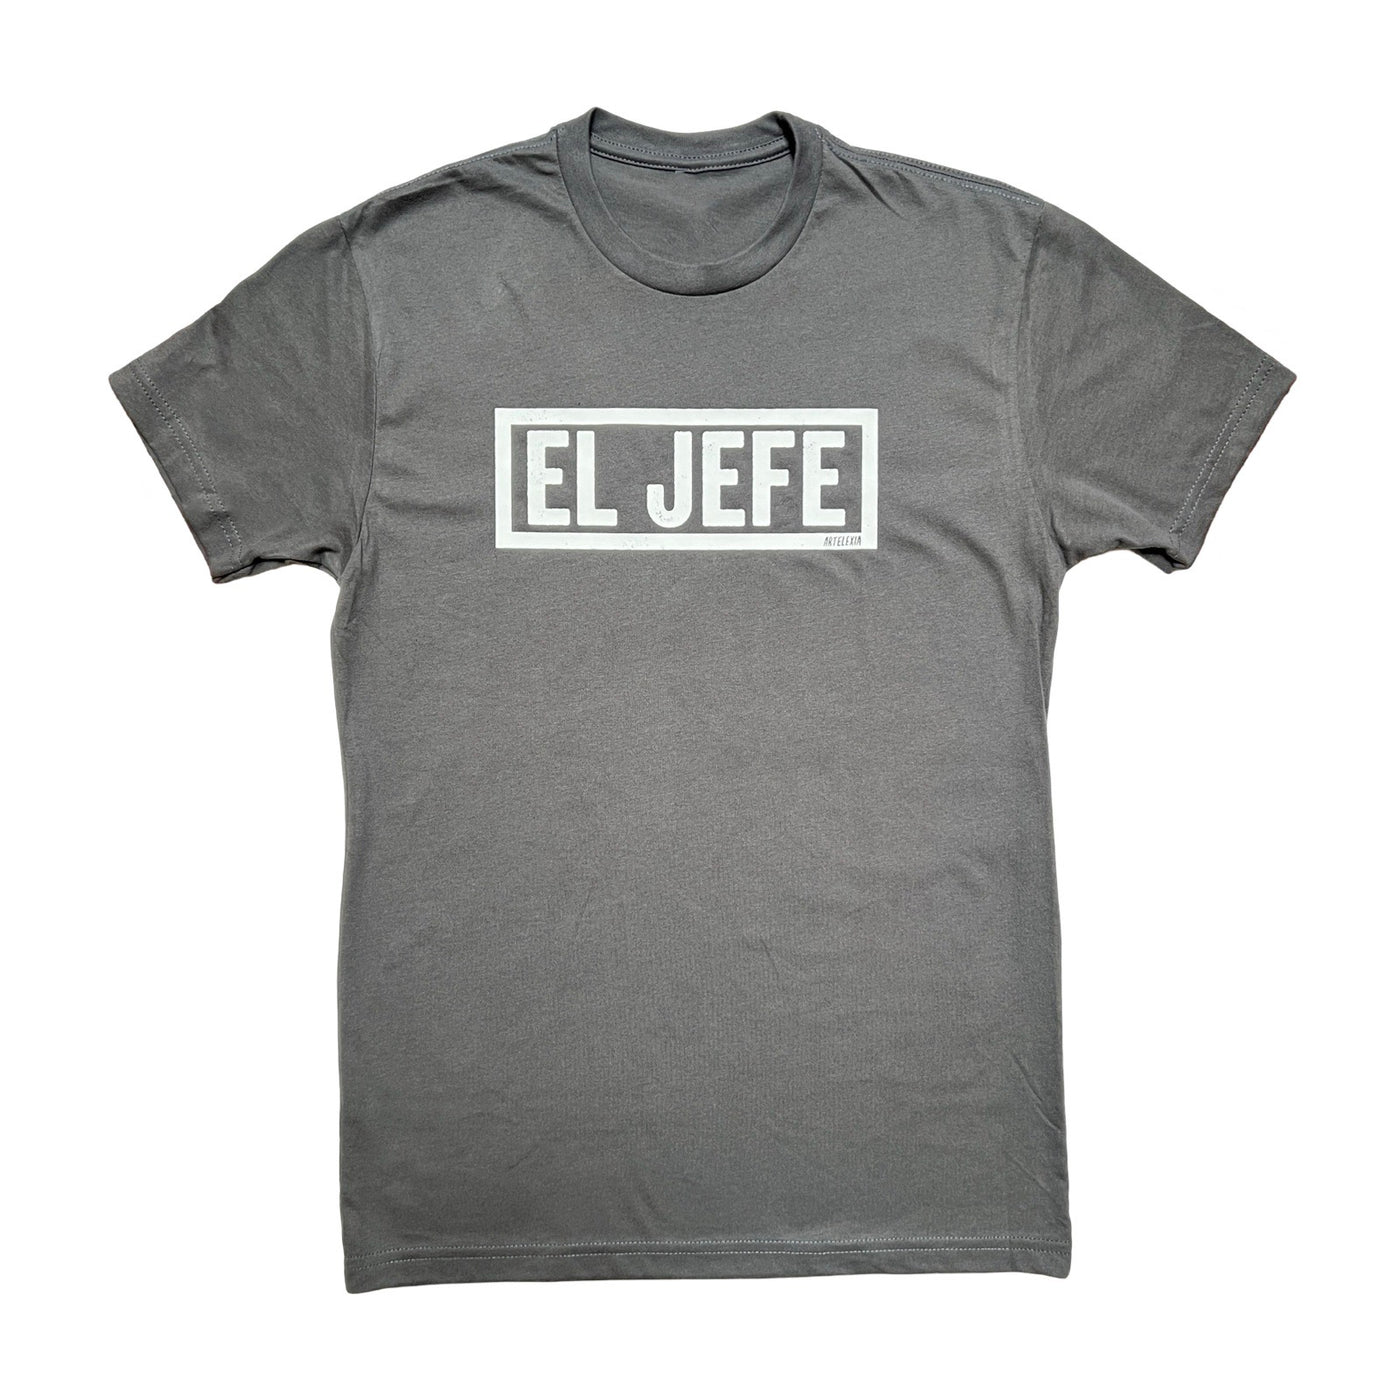 slate grey shirt with the phrase El Jefe in white lettering outlined by a white box.